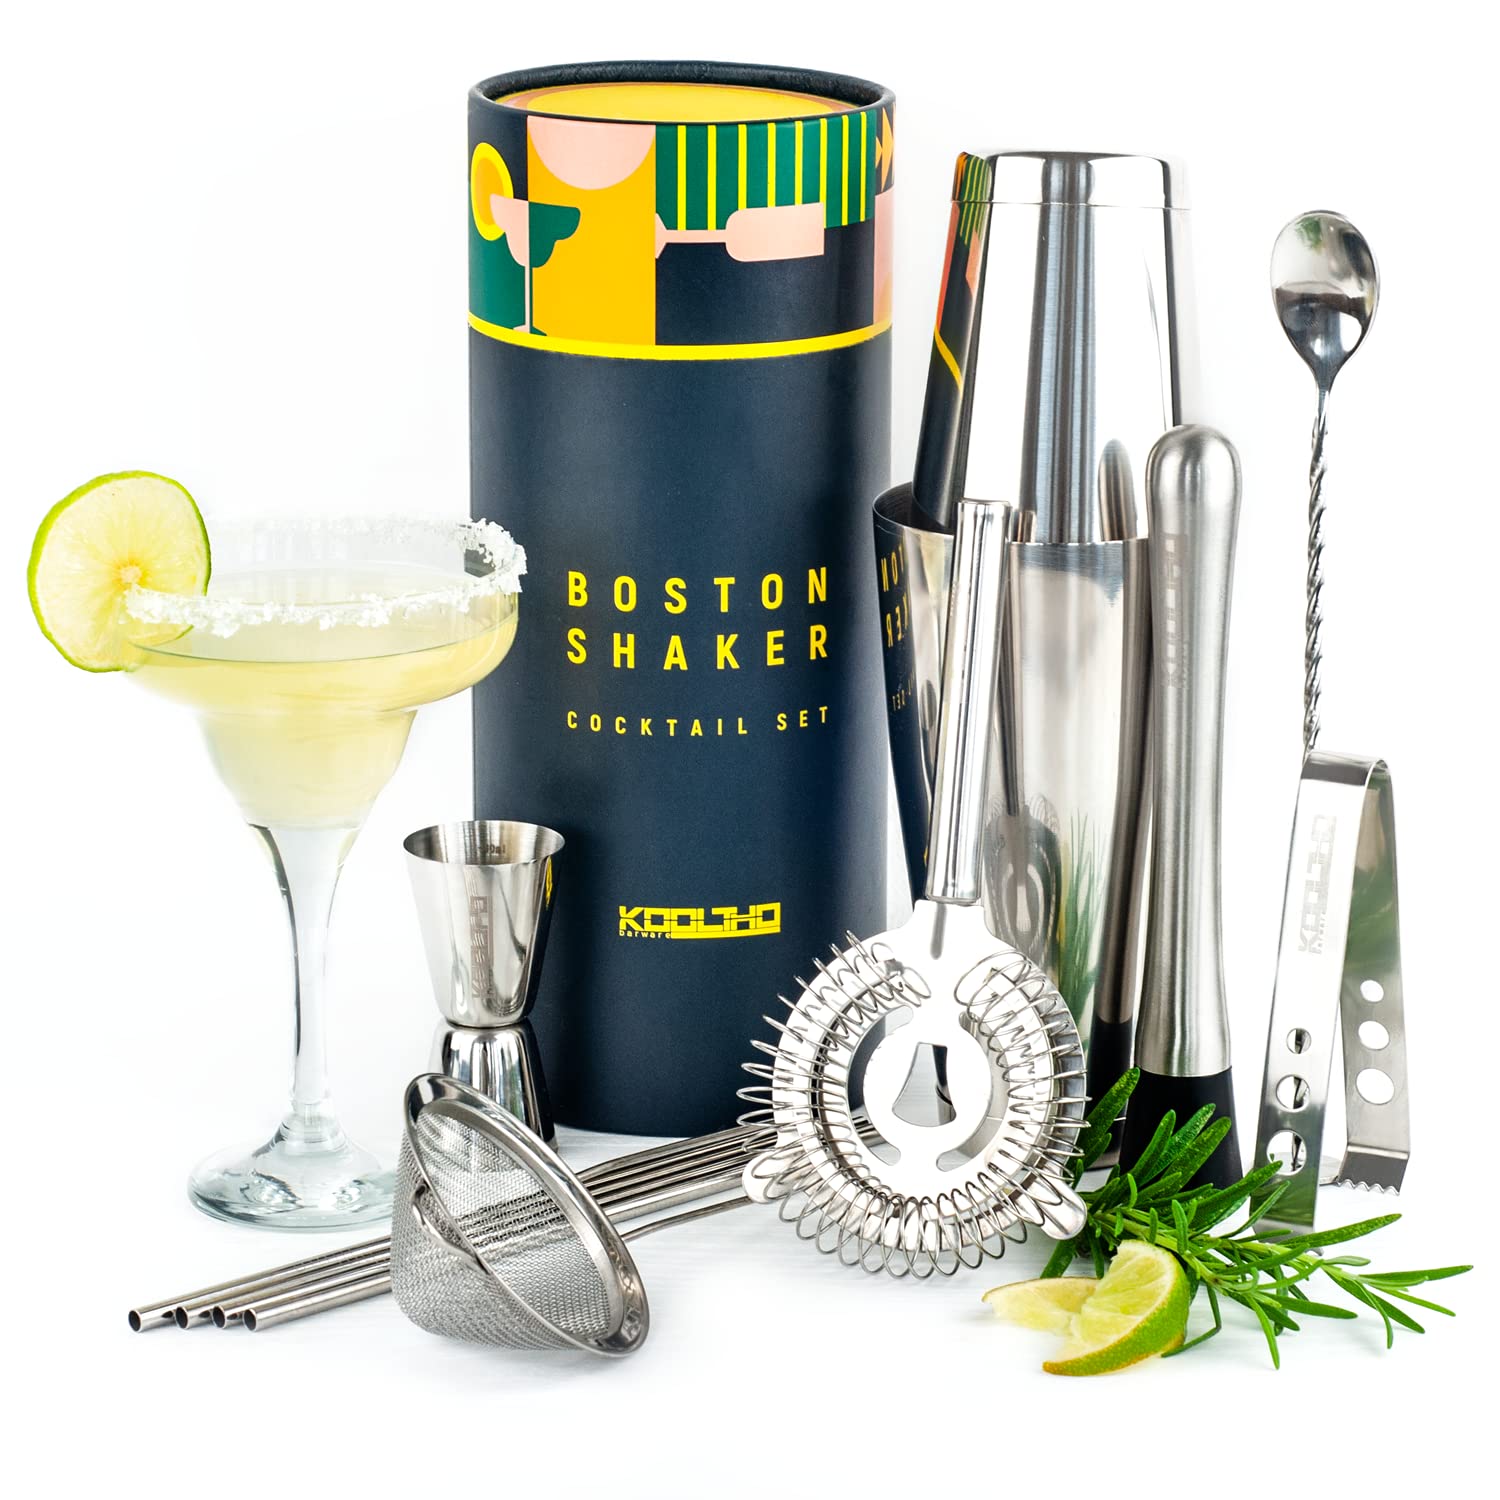 Boston Shaker Set Cocktail Kit, Full Bar Mixer Sets for Professional Bartender, Stainless Steel Drink Shakers Weighted Tin with Strainer Jigger Spoon Muddler Straws, Cocktails Lovers Gifts Women Men